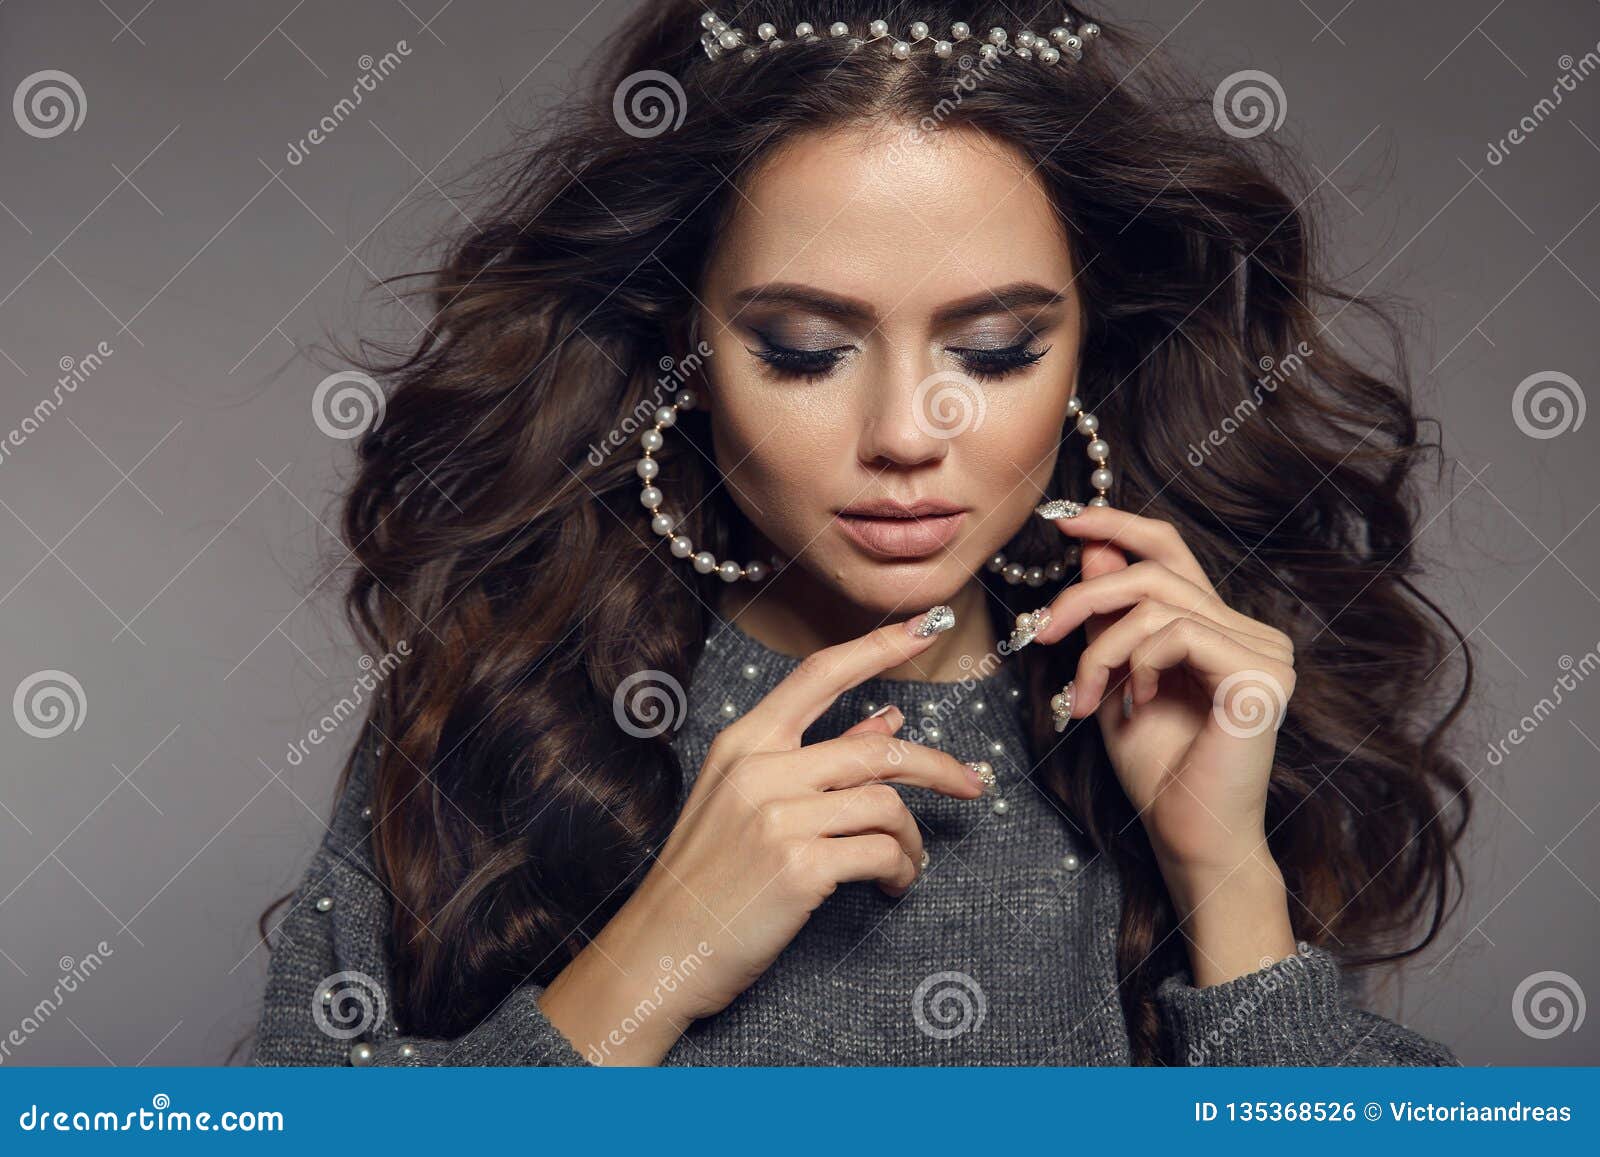 Brunette Portrait Beauty Makeup Pearls Jewelry Set Curly Long Hair Style Manicured Nails 